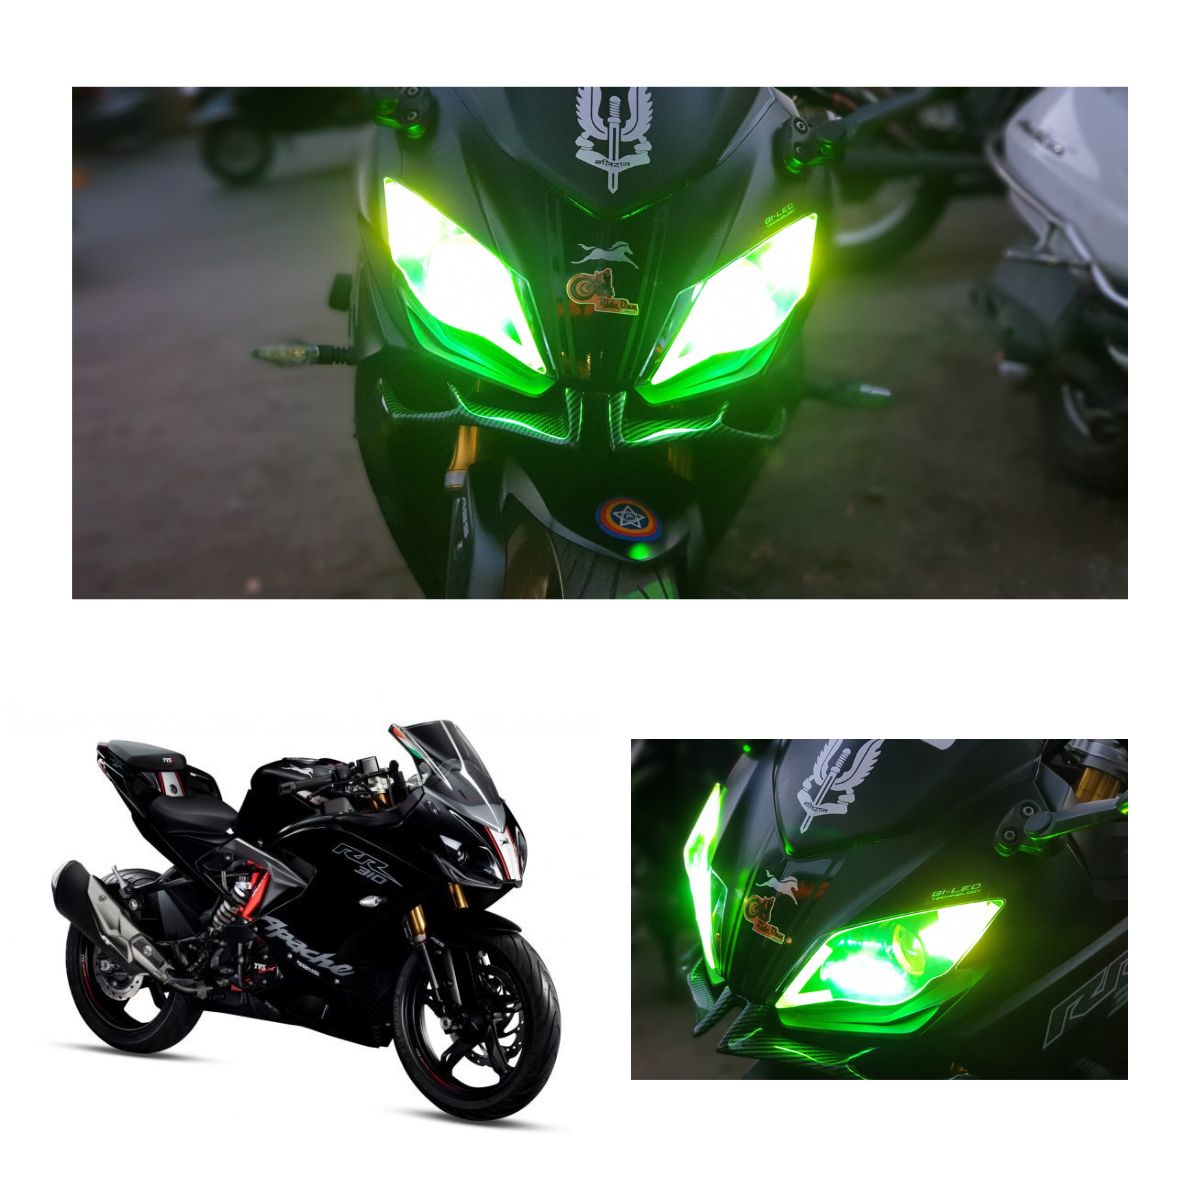 Headlight Screen Protector for TVS Apache RR 310 (BS4/BS6)